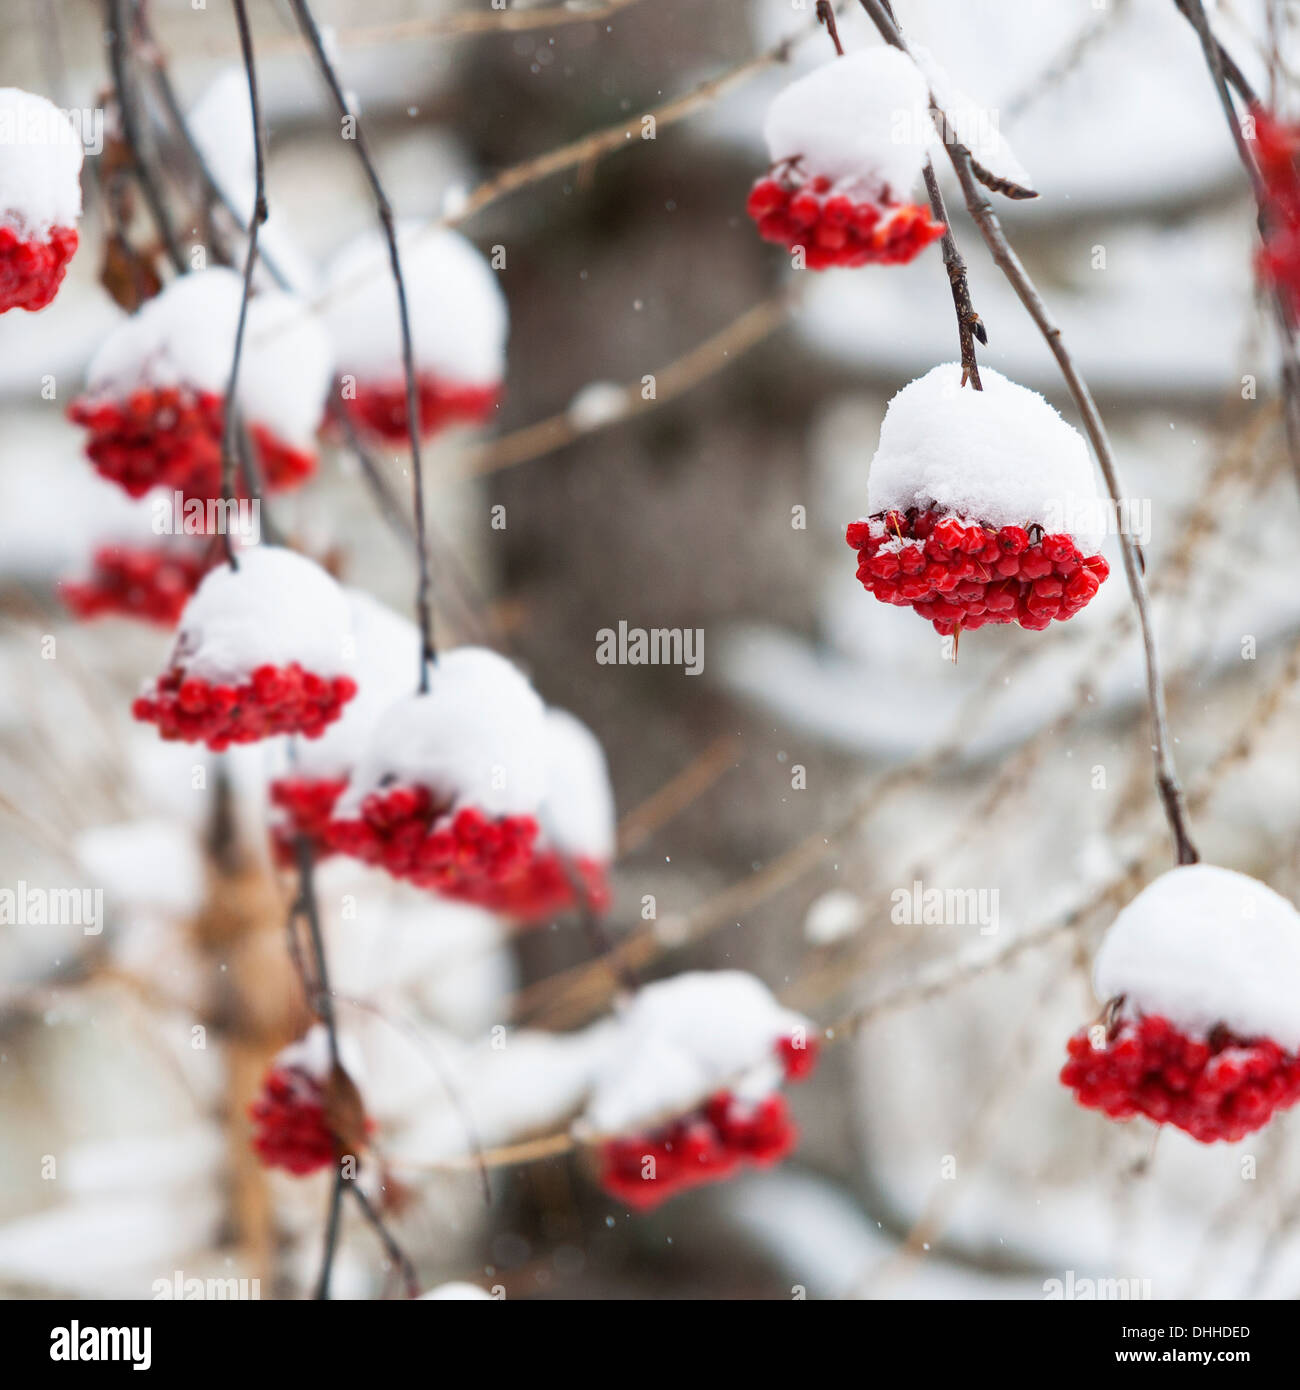 Snow covered red berries Stock Photo